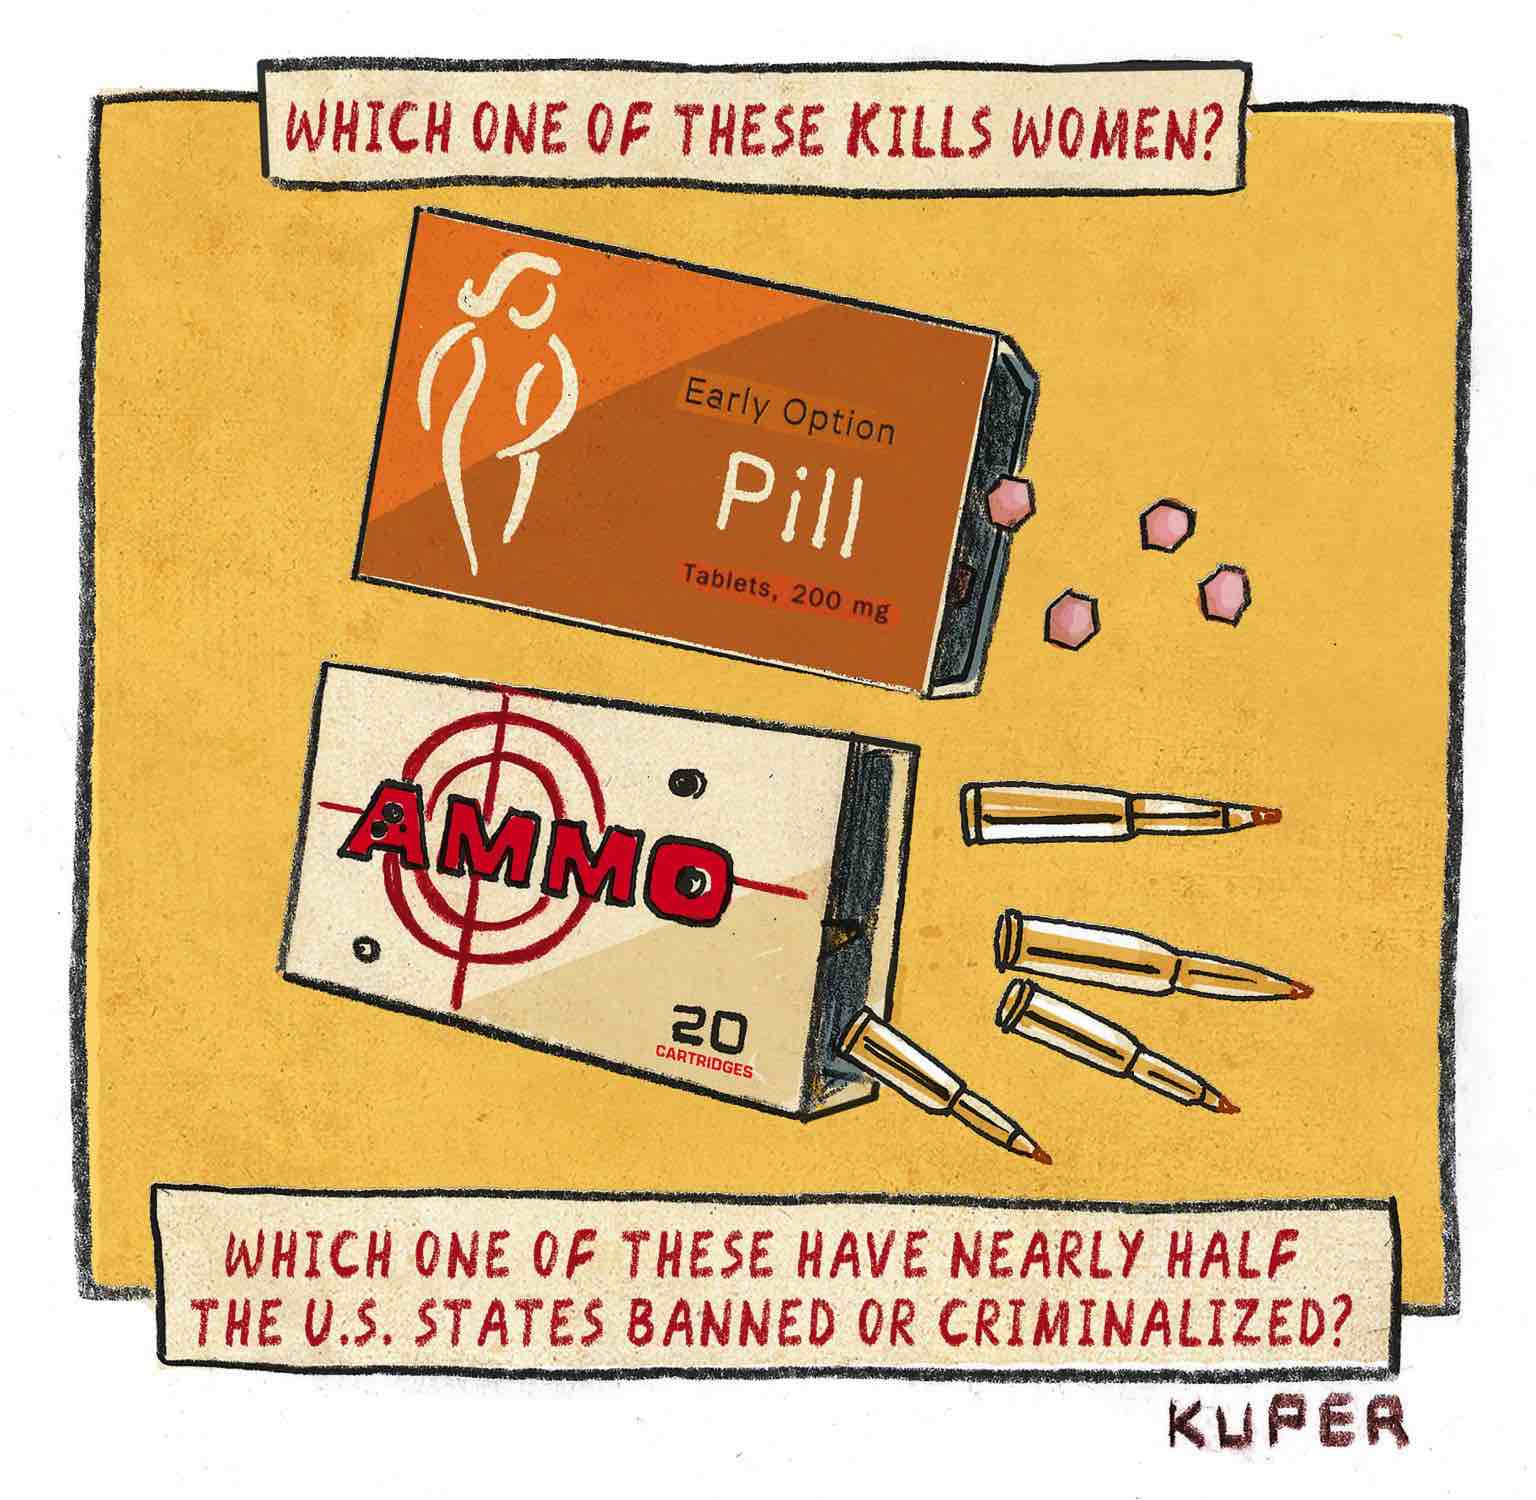 Republicans ban abortion medication but ignore bullets and weapons of war